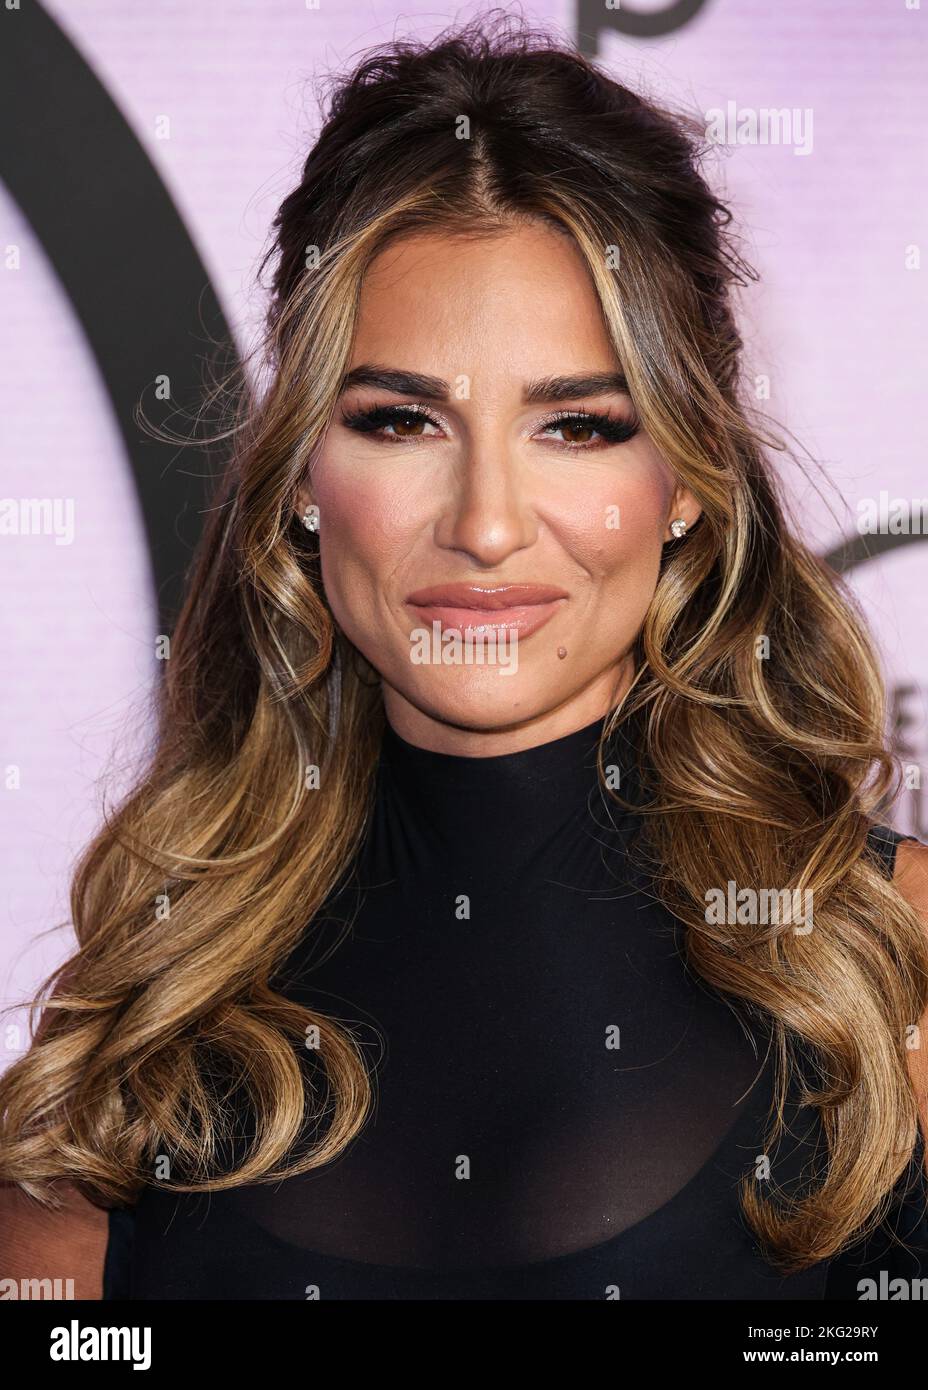 LOS ANGELES, CALIFORNIA, USA - NOVEMBER 20: Jessie James Decker arrives at the 2022 American Music Awards (50th Annual American Music Awards) held at Microsoft Theater at L.A. Live on November 20, 2022 in Los Angeles, California, United States. (Photo by Xavier Collin/Image Press Agency) Stock Photo